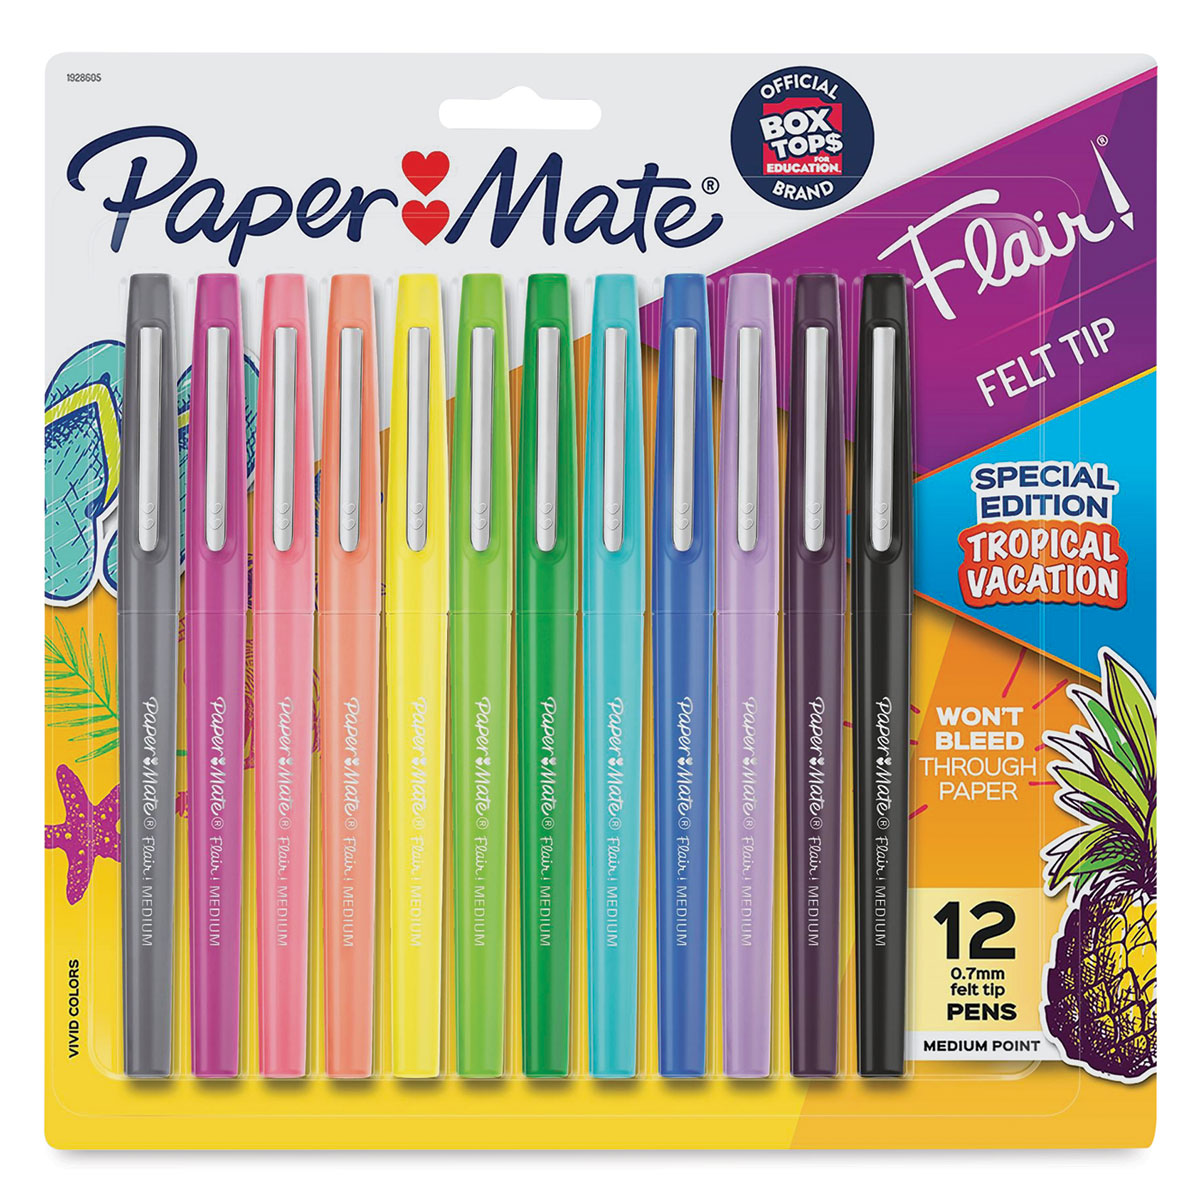 Papermate Flair Pens – ARCH Art Supplies